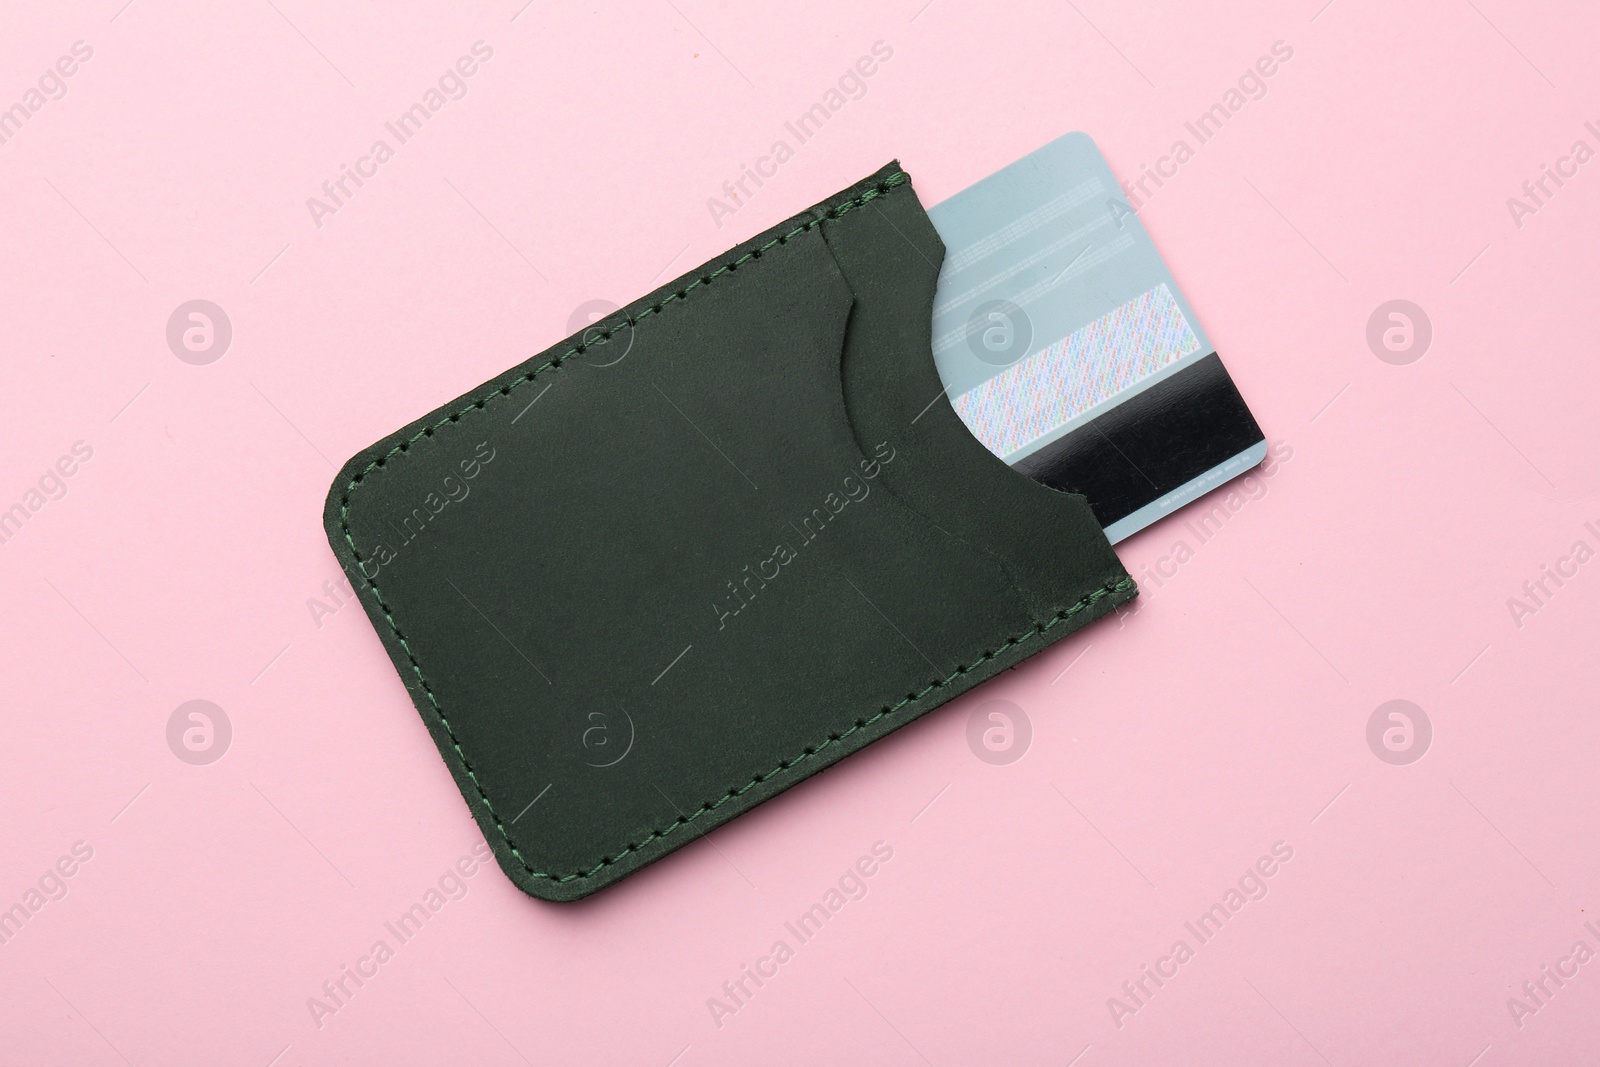 Photo of Leather card holder with credit card on pink background, top view